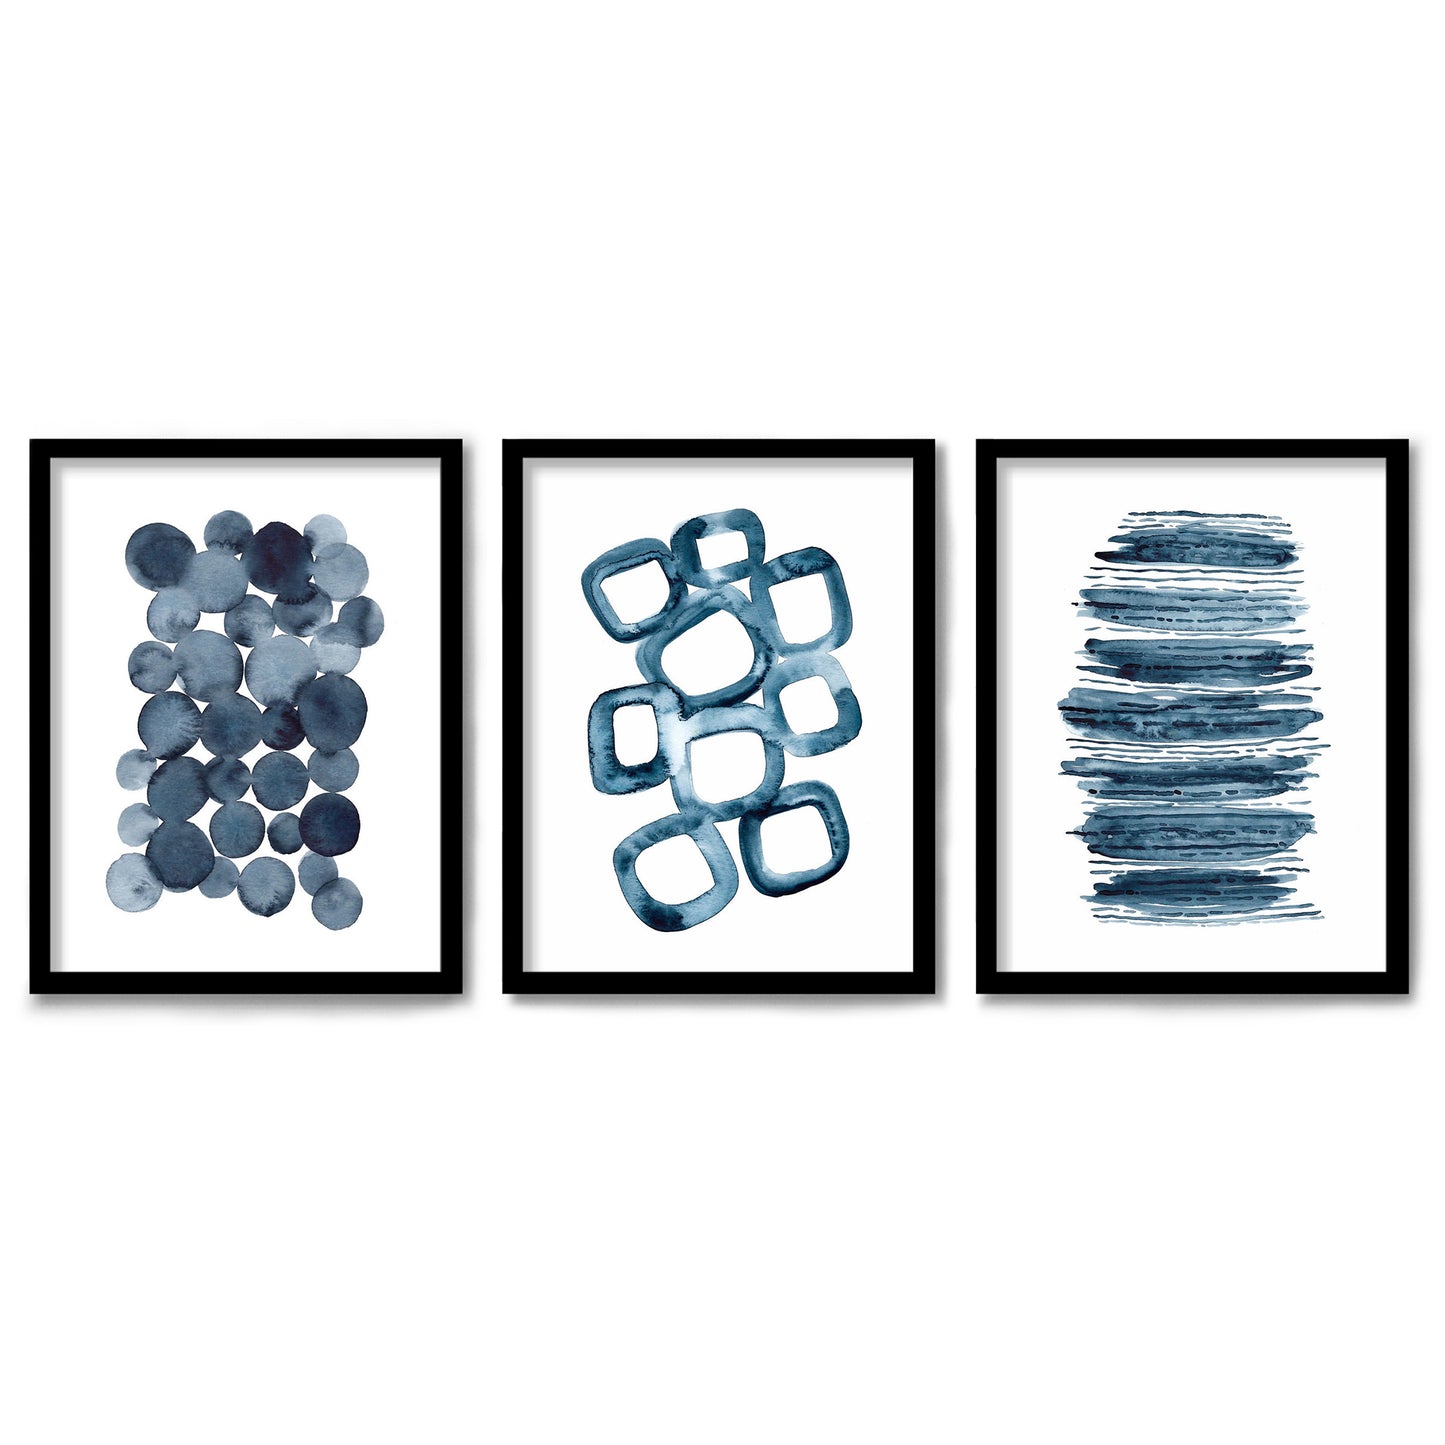 Watercolor Shapes by Lisa Nohren 3 Piece Framed Triptych 